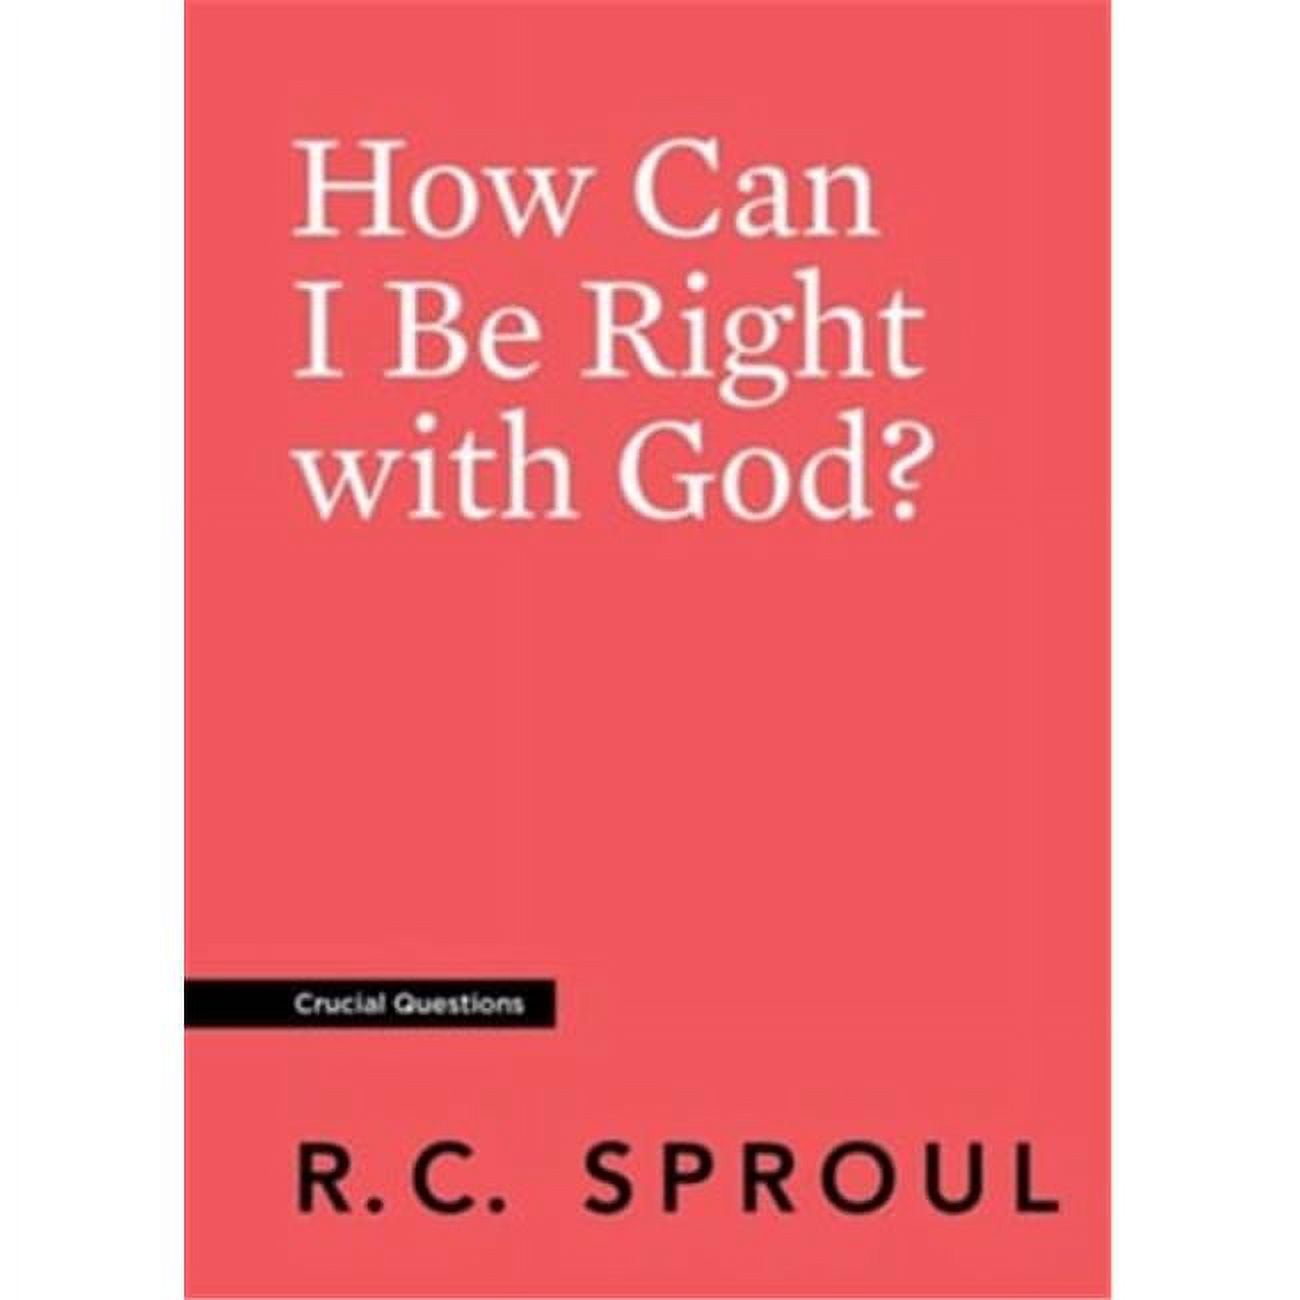 Reformation Trust Publishing 137952 How Can I Be Right With God